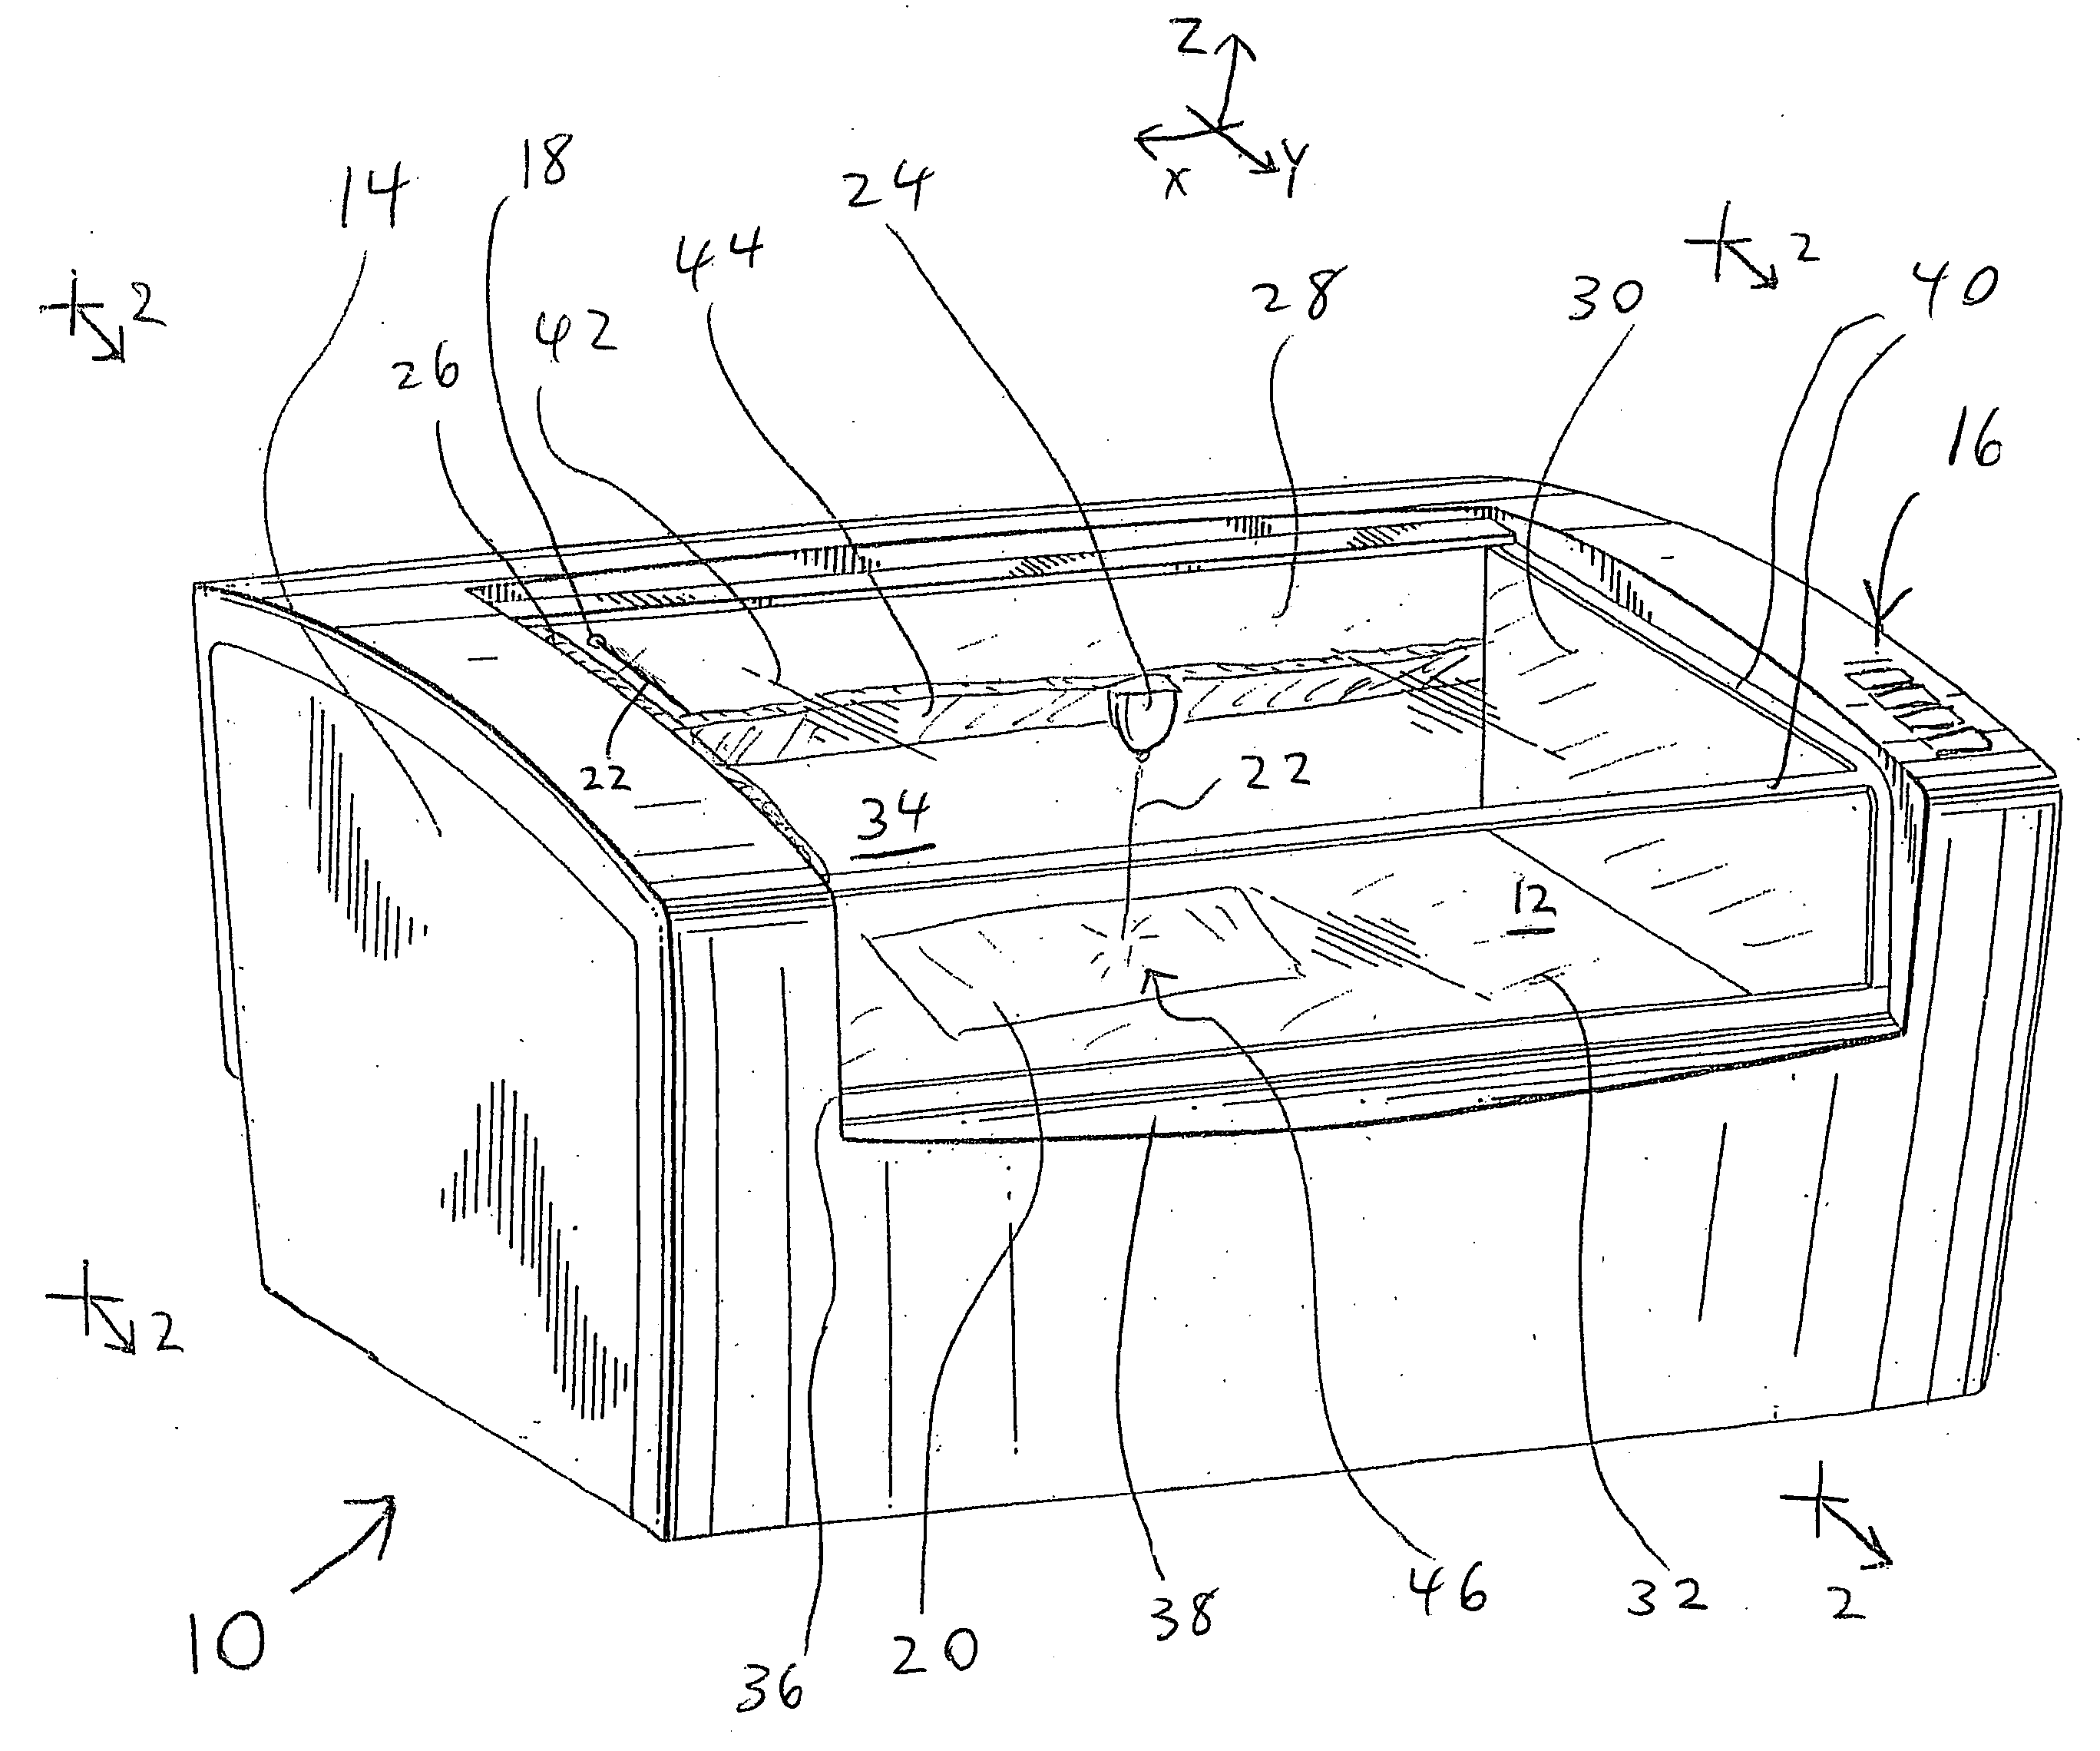 Laser containment structure allowing the use of plastics